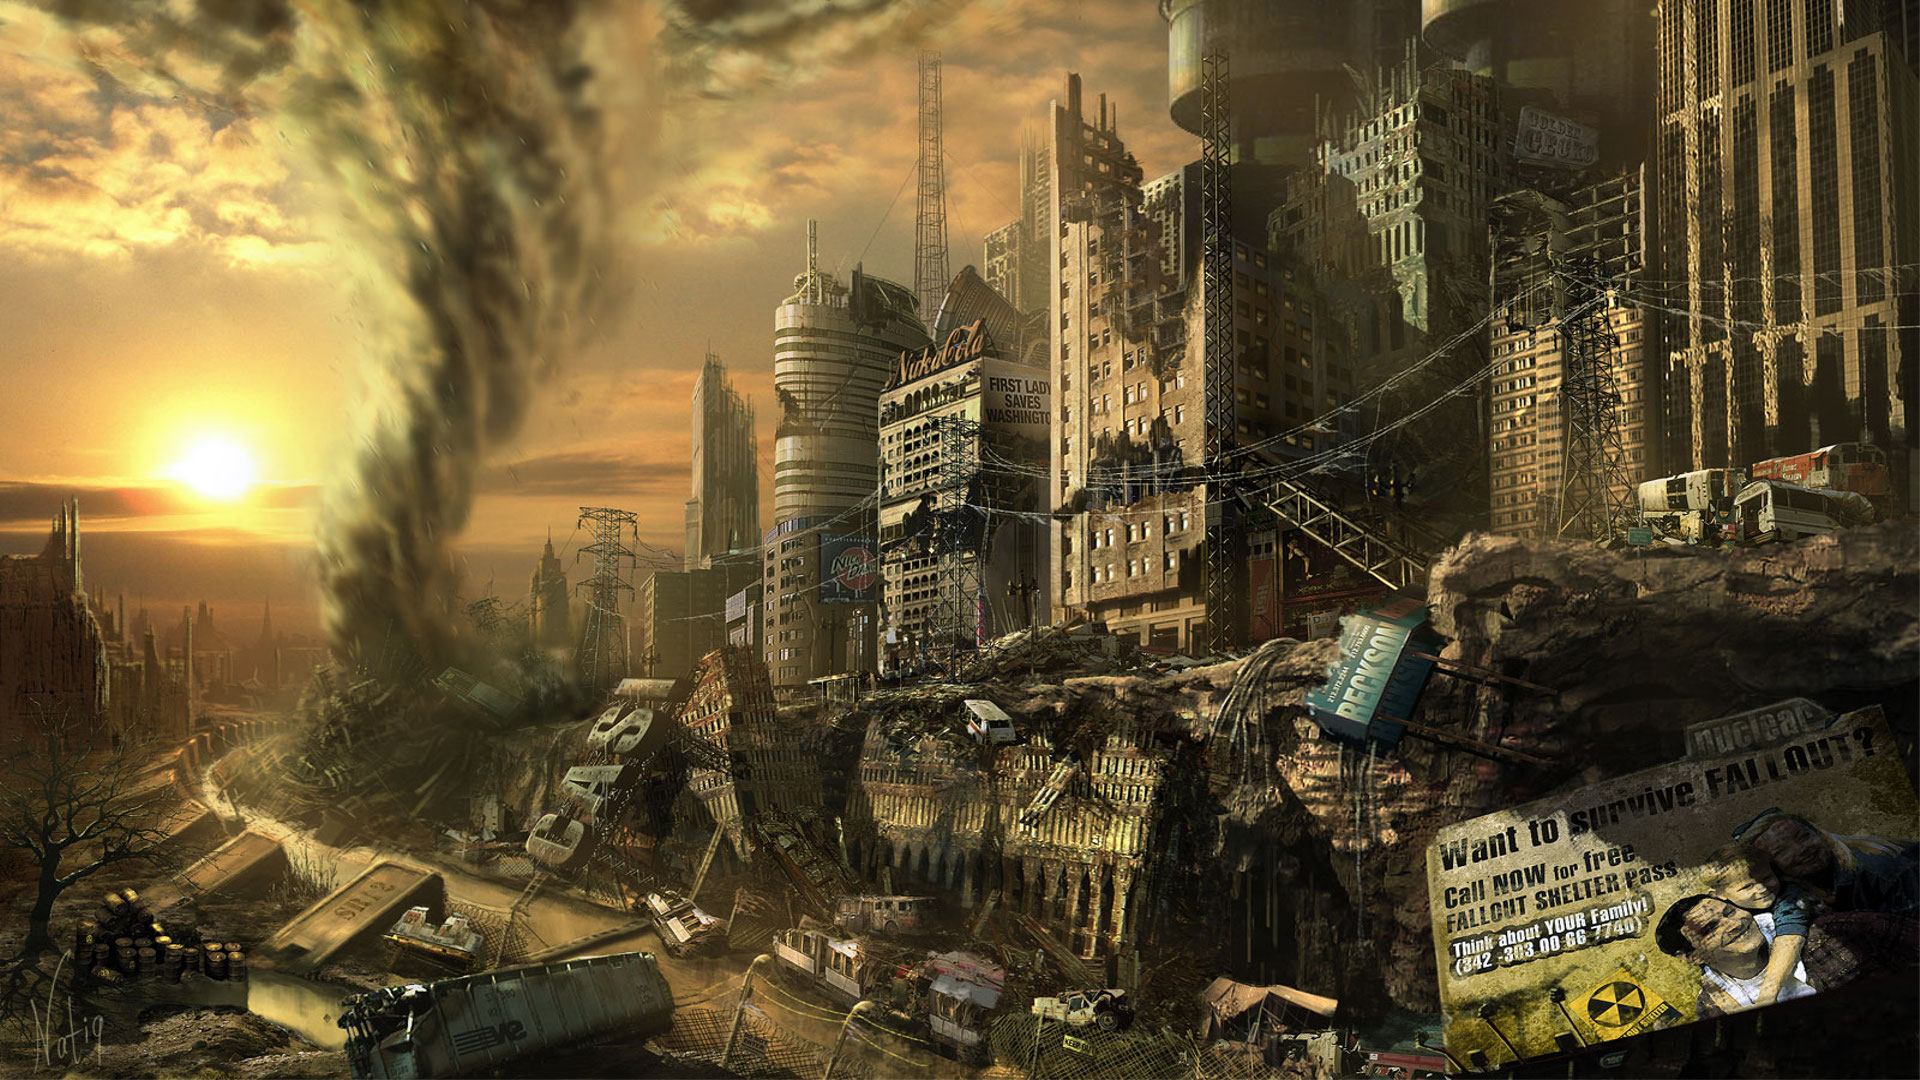 General 1920x1080 video games science fiction futuristic apocalyptic Fallout Fallout 3 sunset